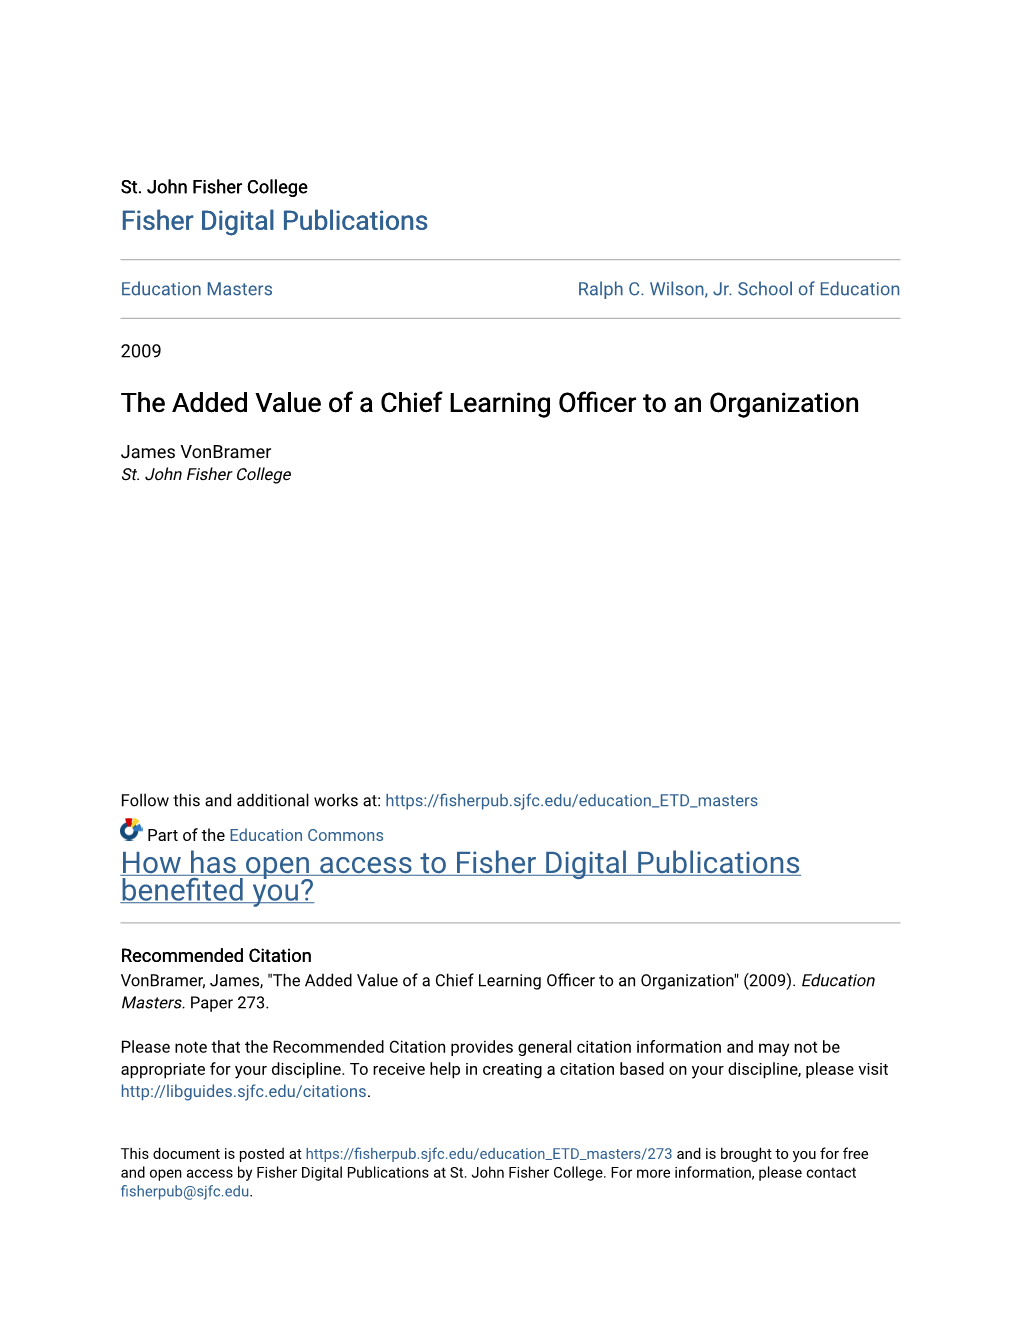 The Added Value of a Chief Learning Officer to an Organization